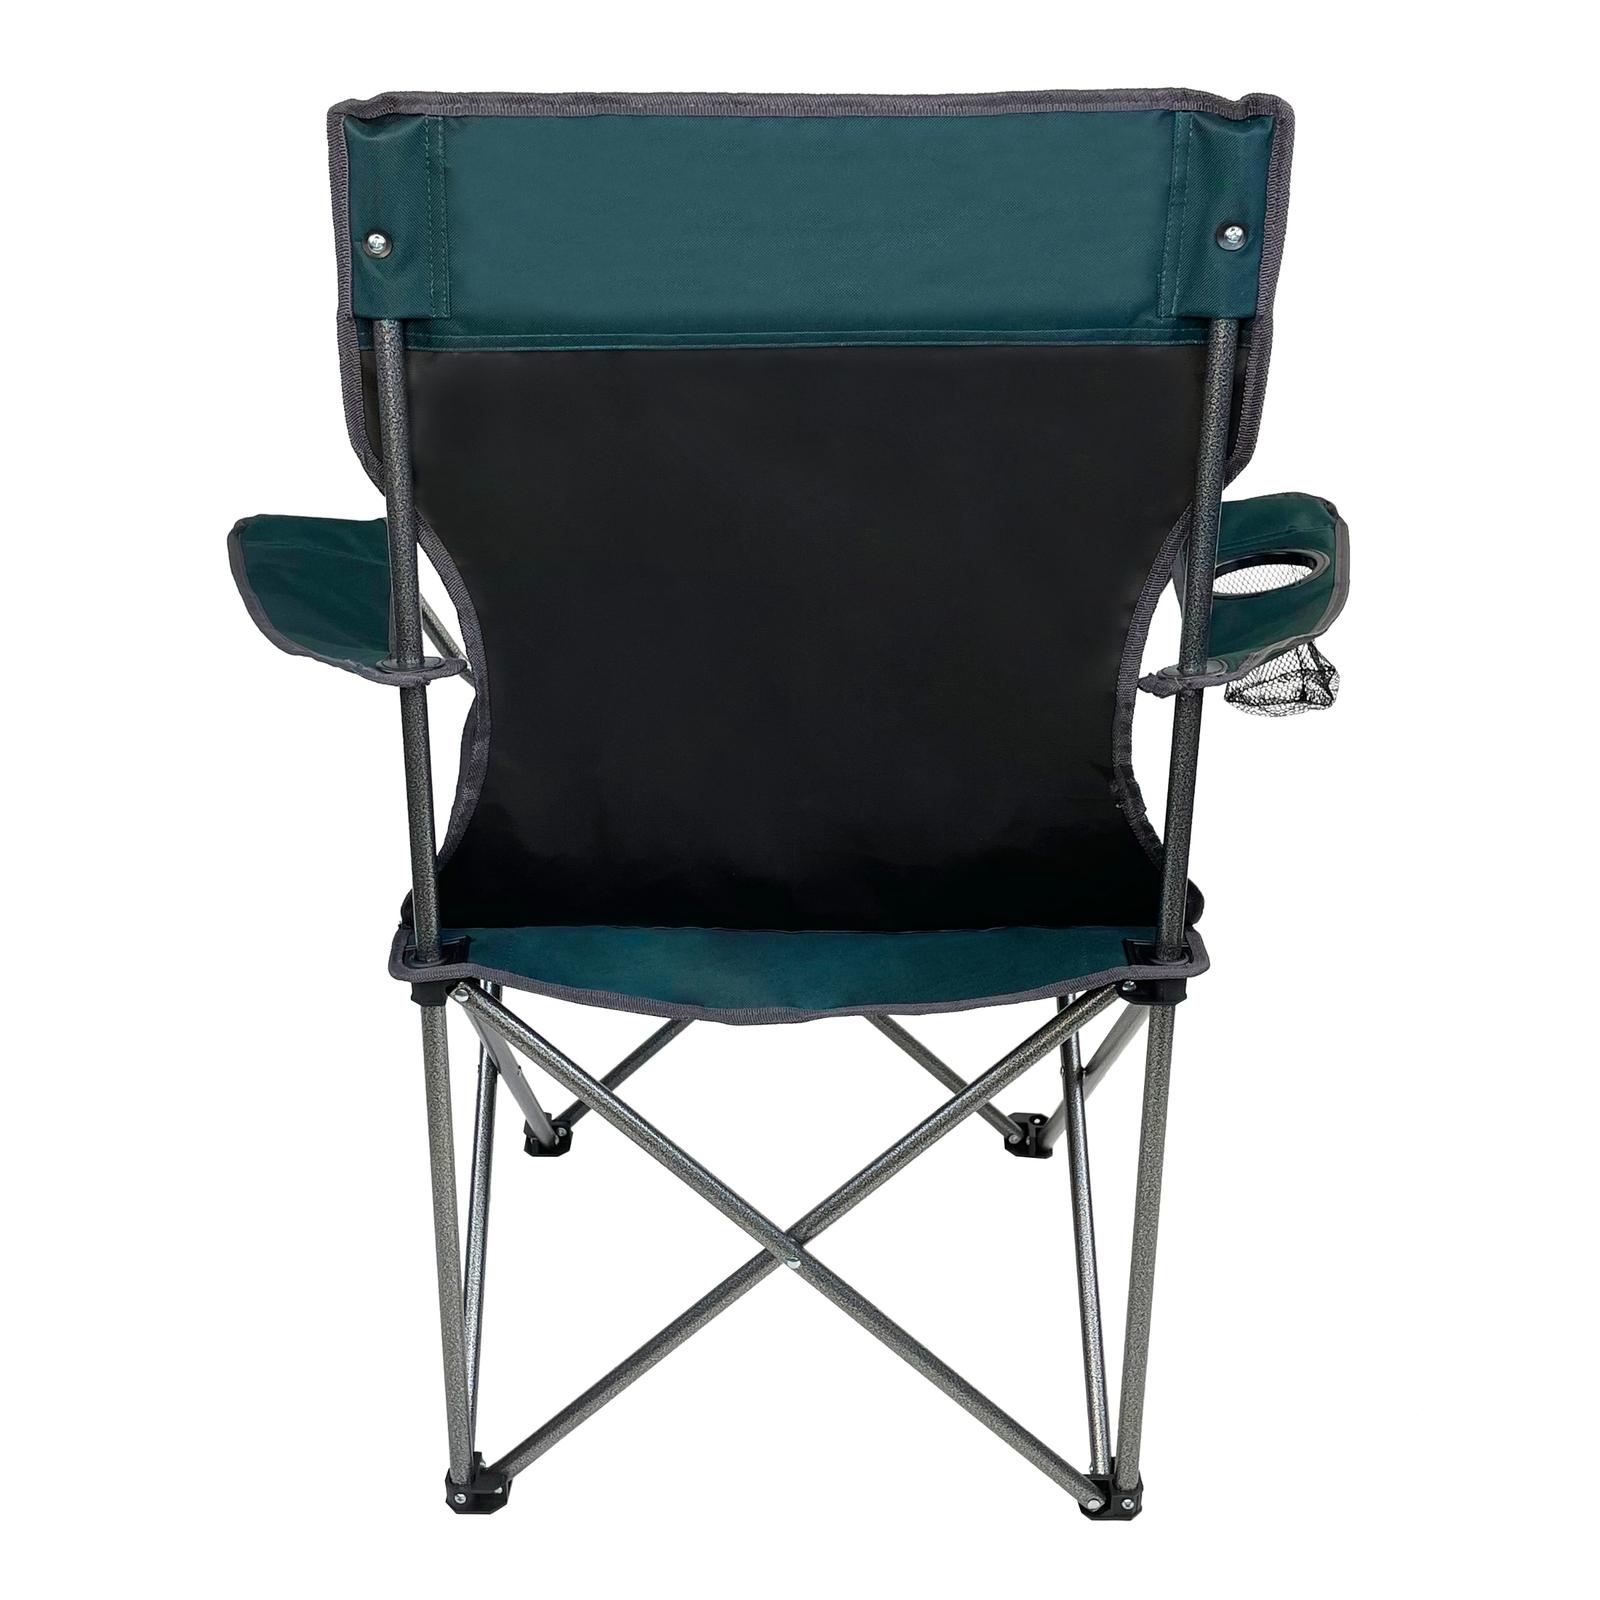 Outdoor Revival Everyday Quad Chair back view